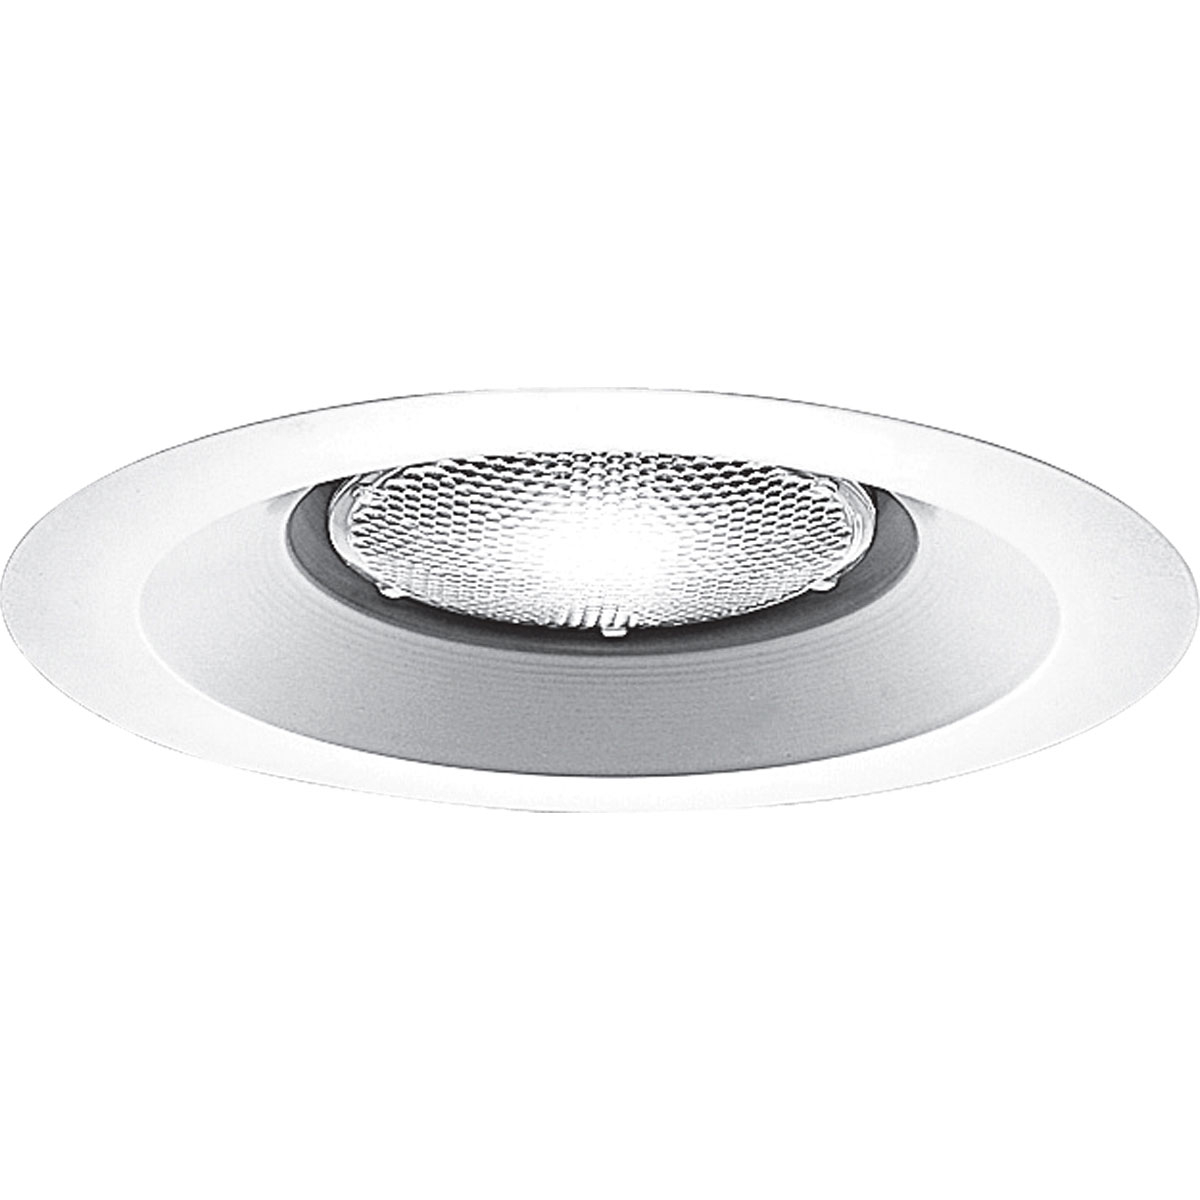 Shower light with a white powdercoat finish and aluminum construction. UL & CUL listed for wet locations. 7-3/4 in outside diameter.